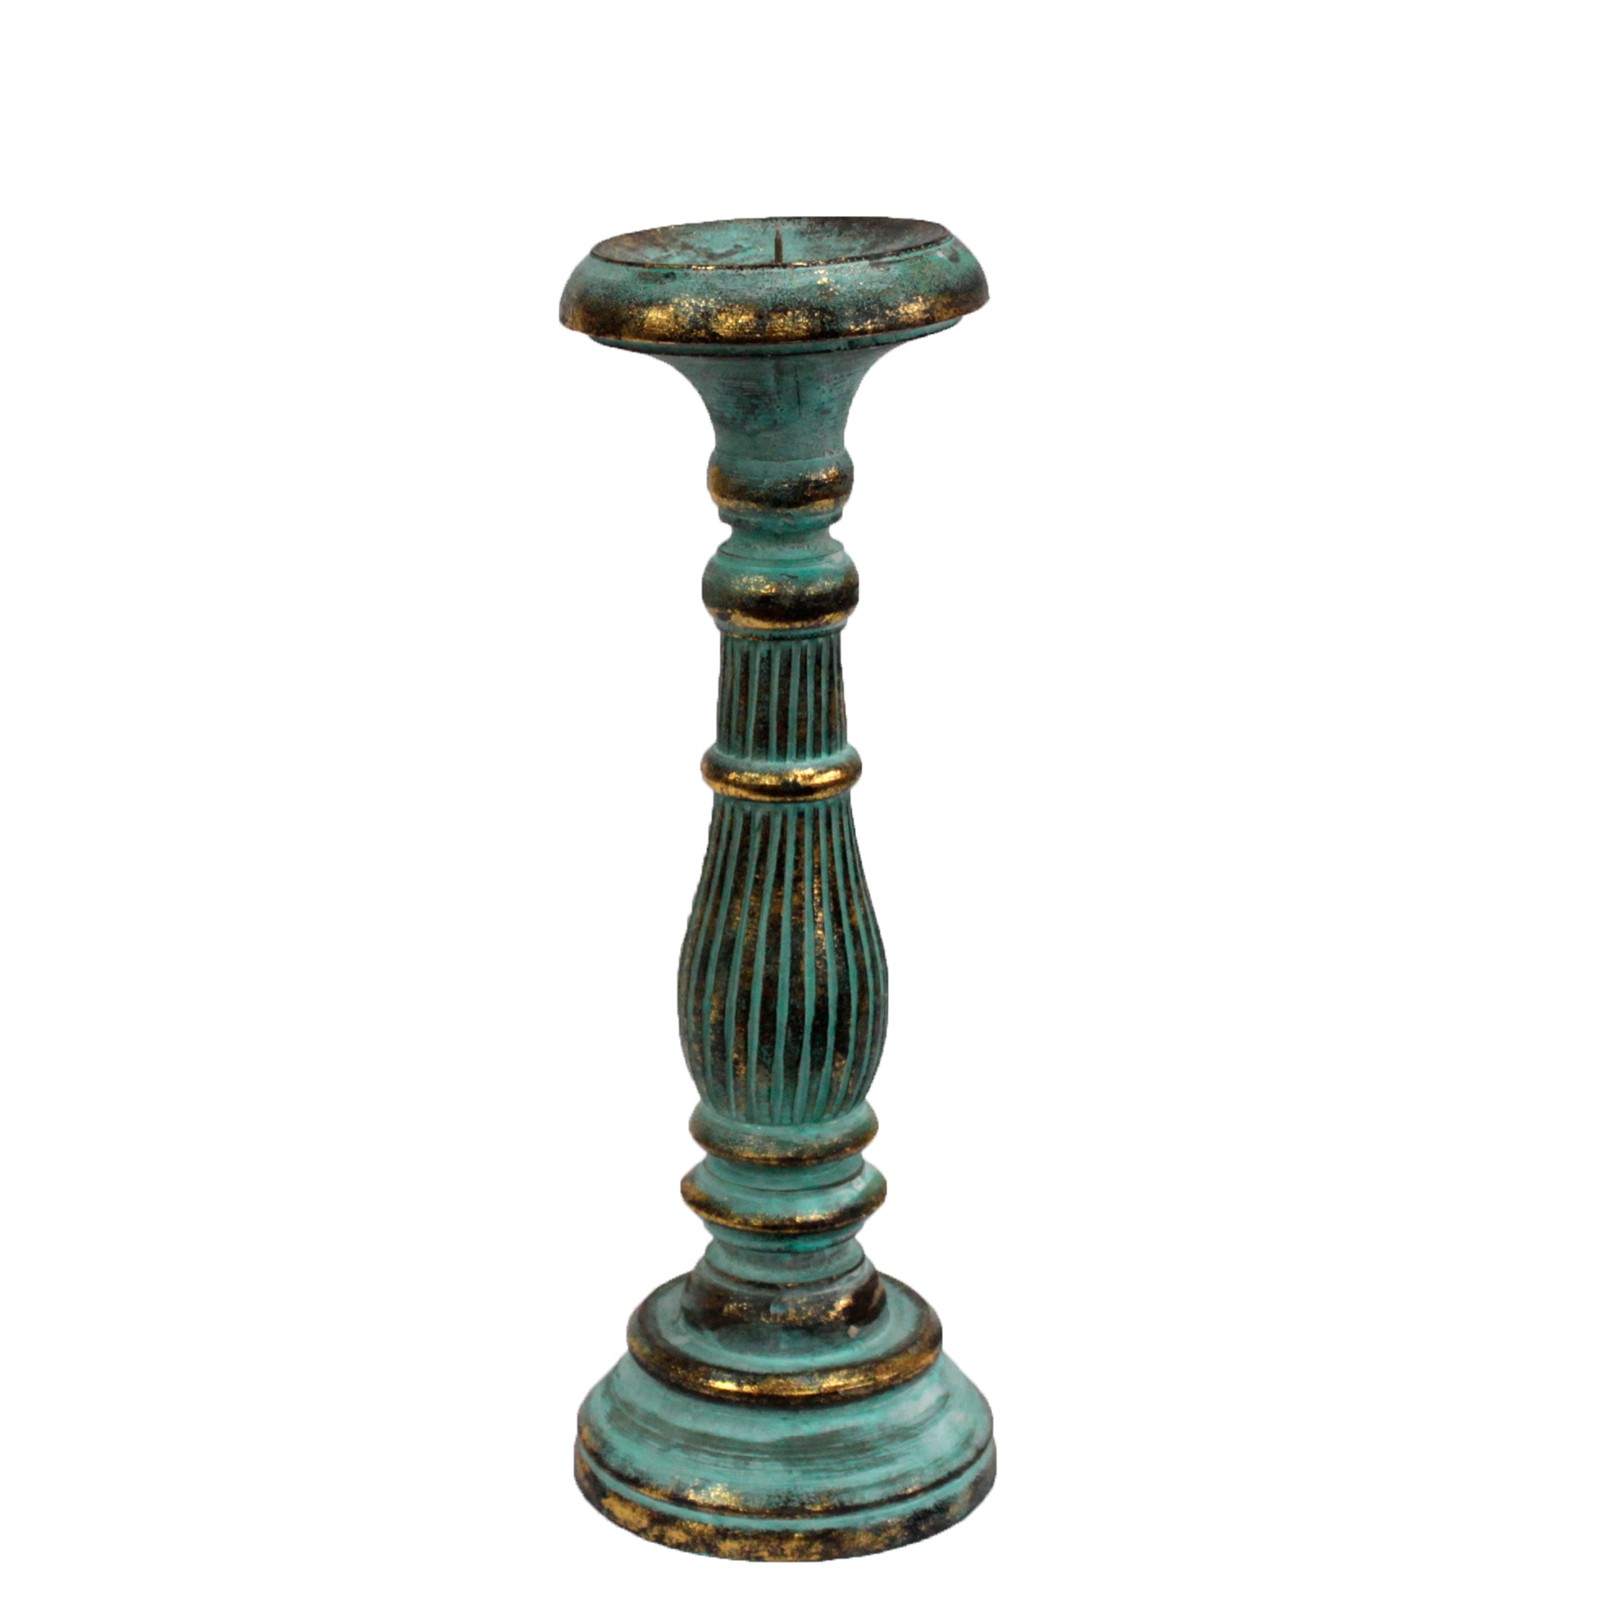 Medium Candle Stand - Turquois Gold